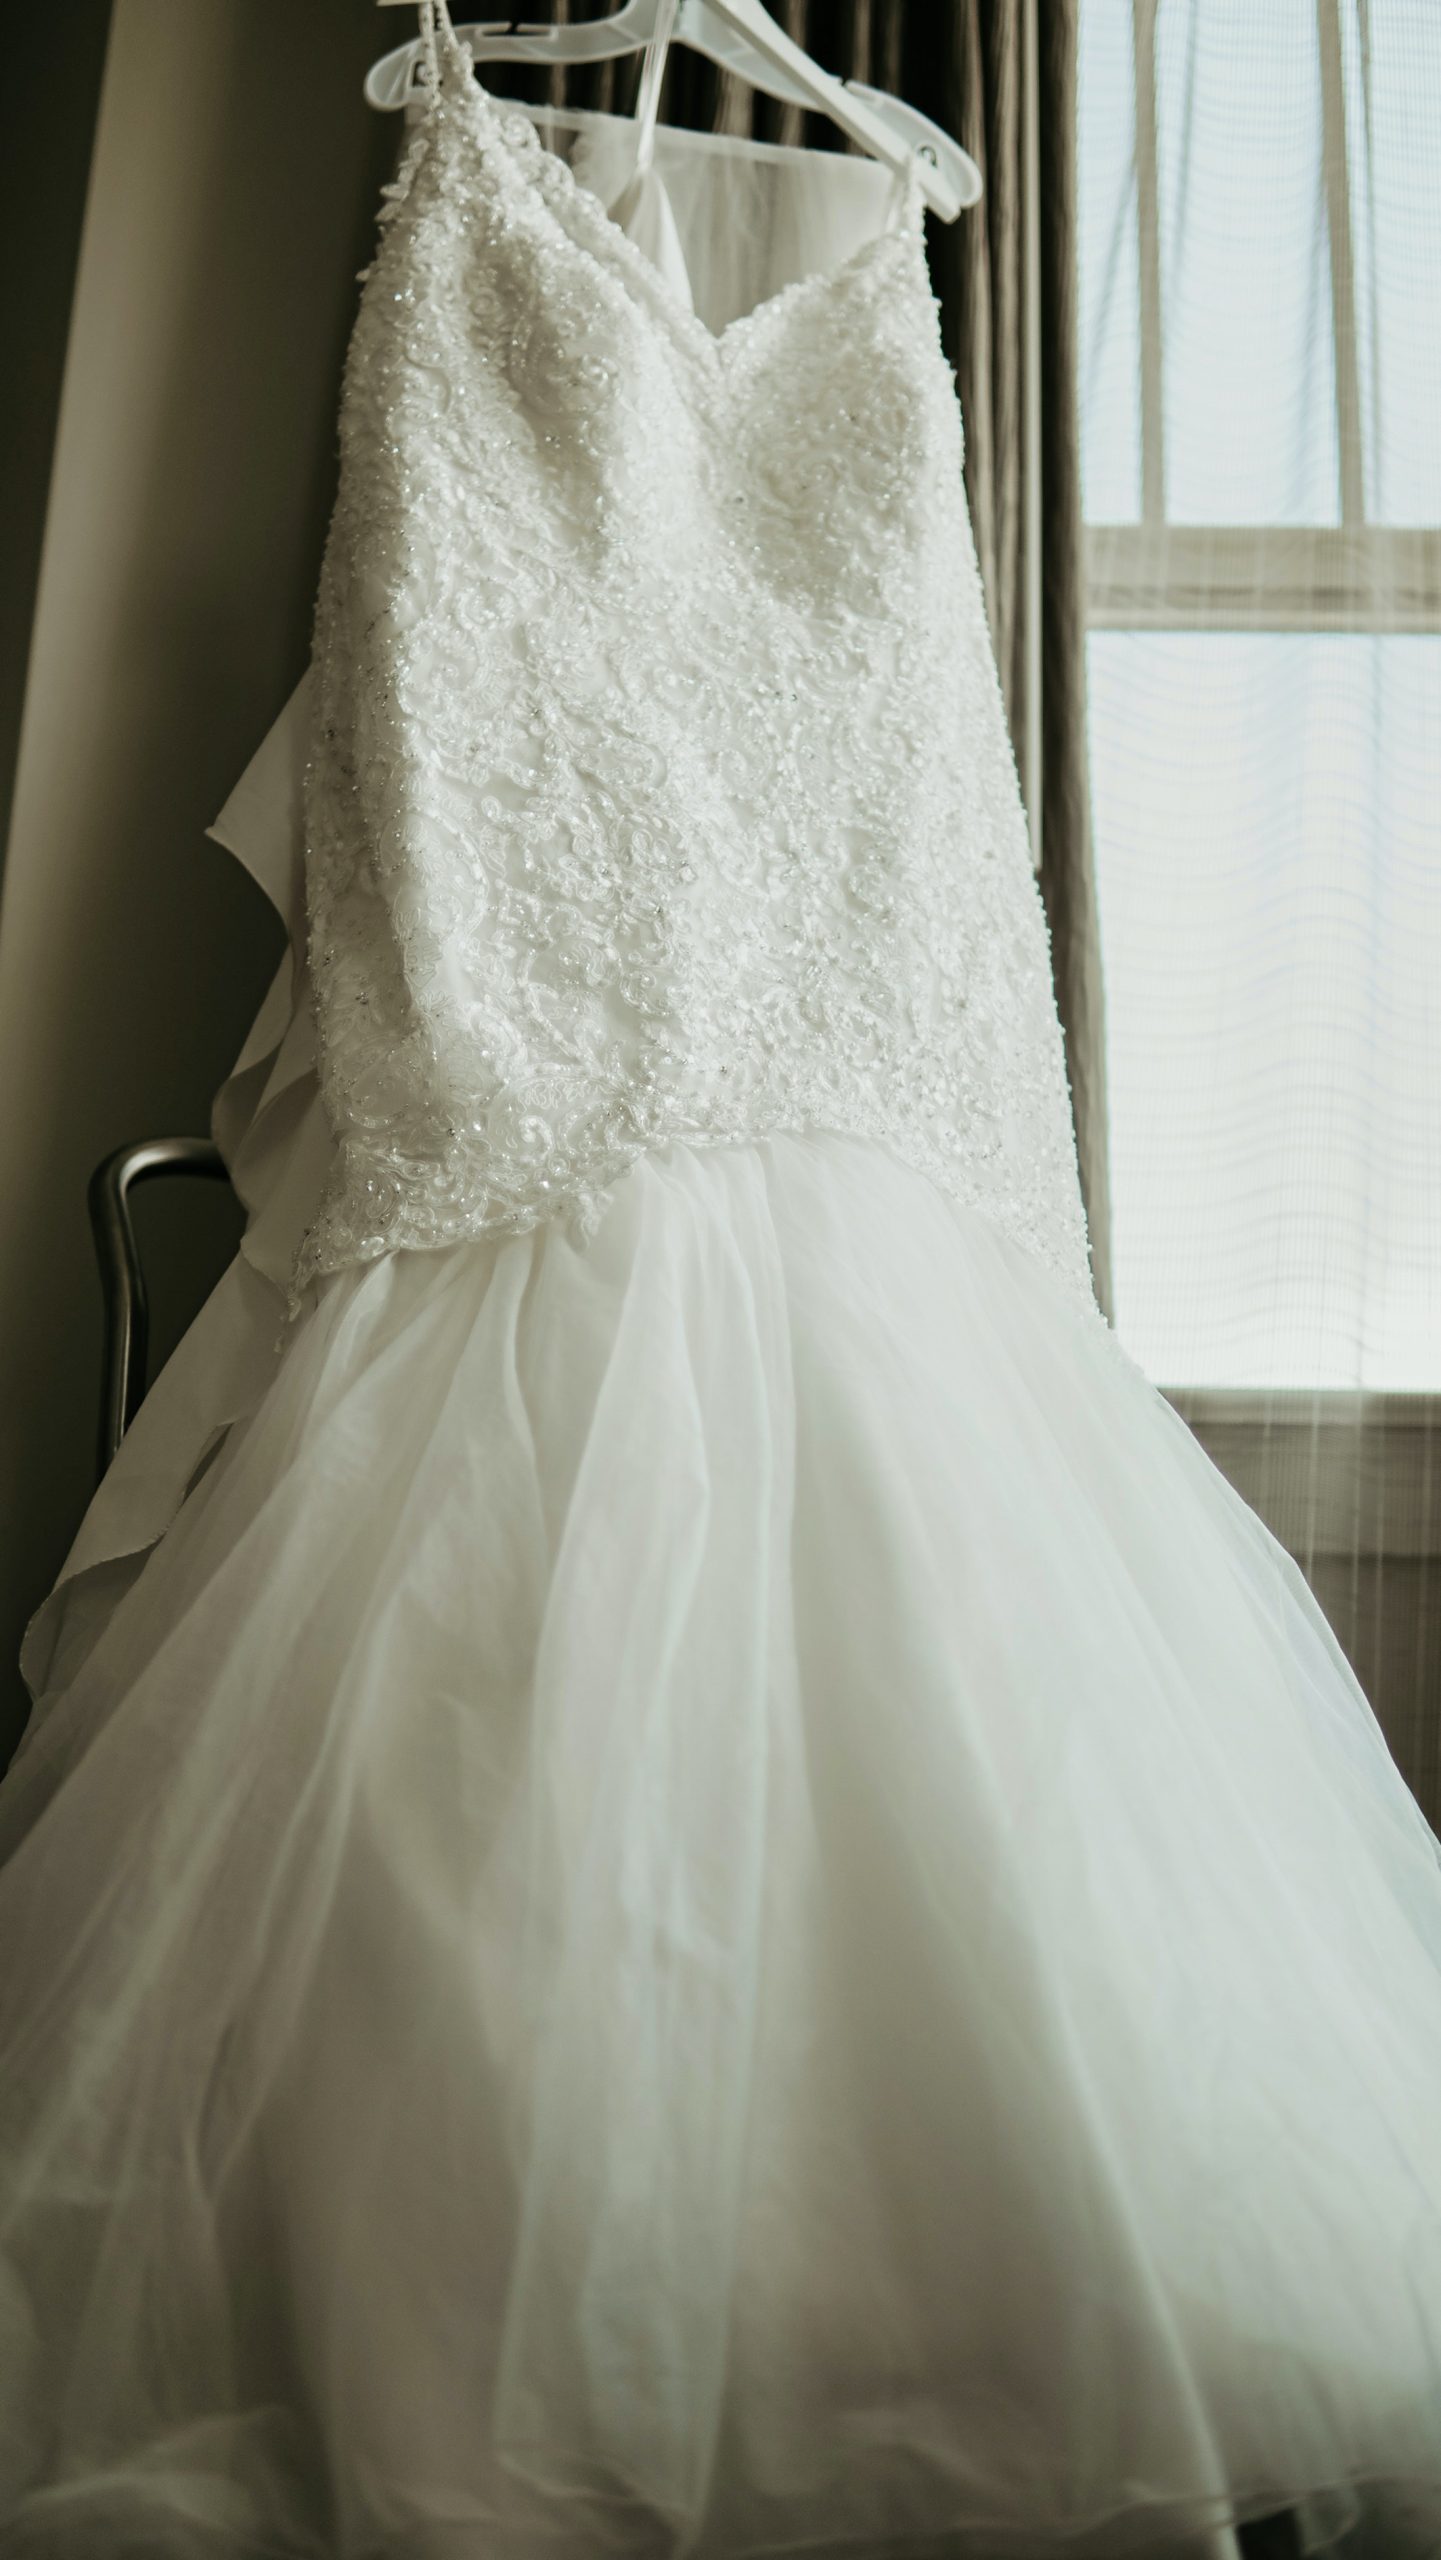 Expert Wedding Dress Cleaning Services in Atlanta - Fabricare Center